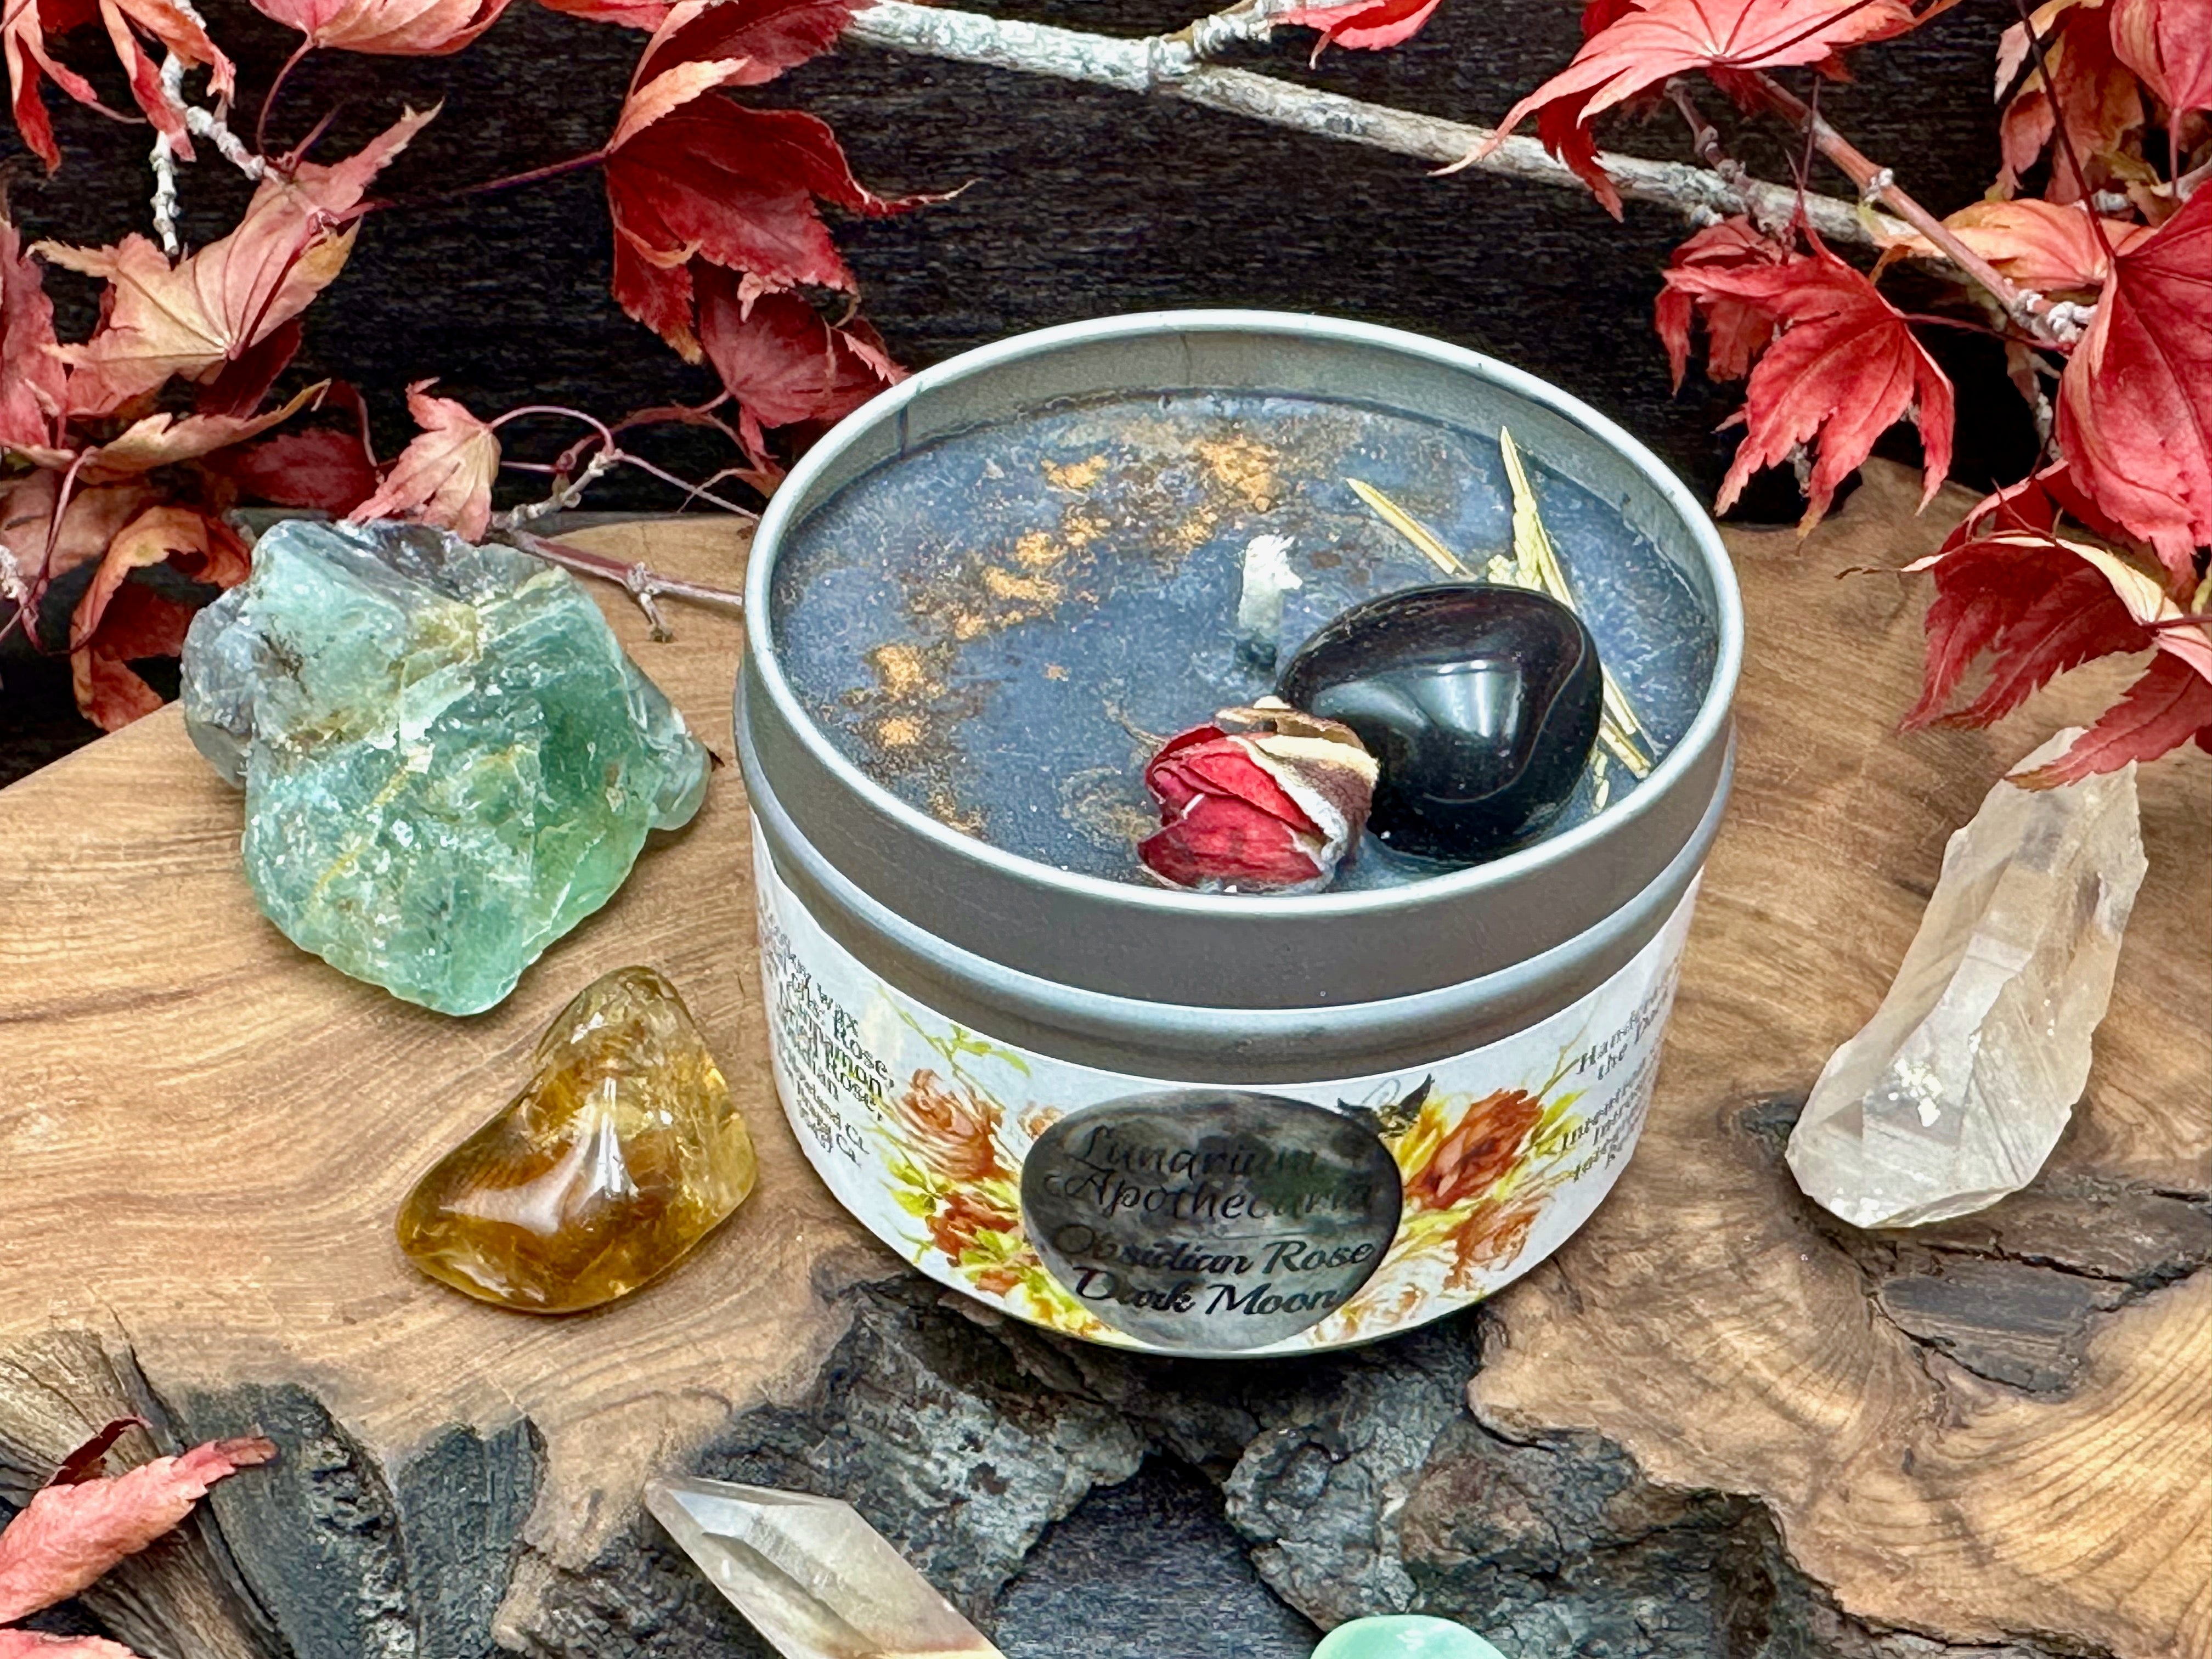 Obsidian Rose Dark Moon Intention Candle